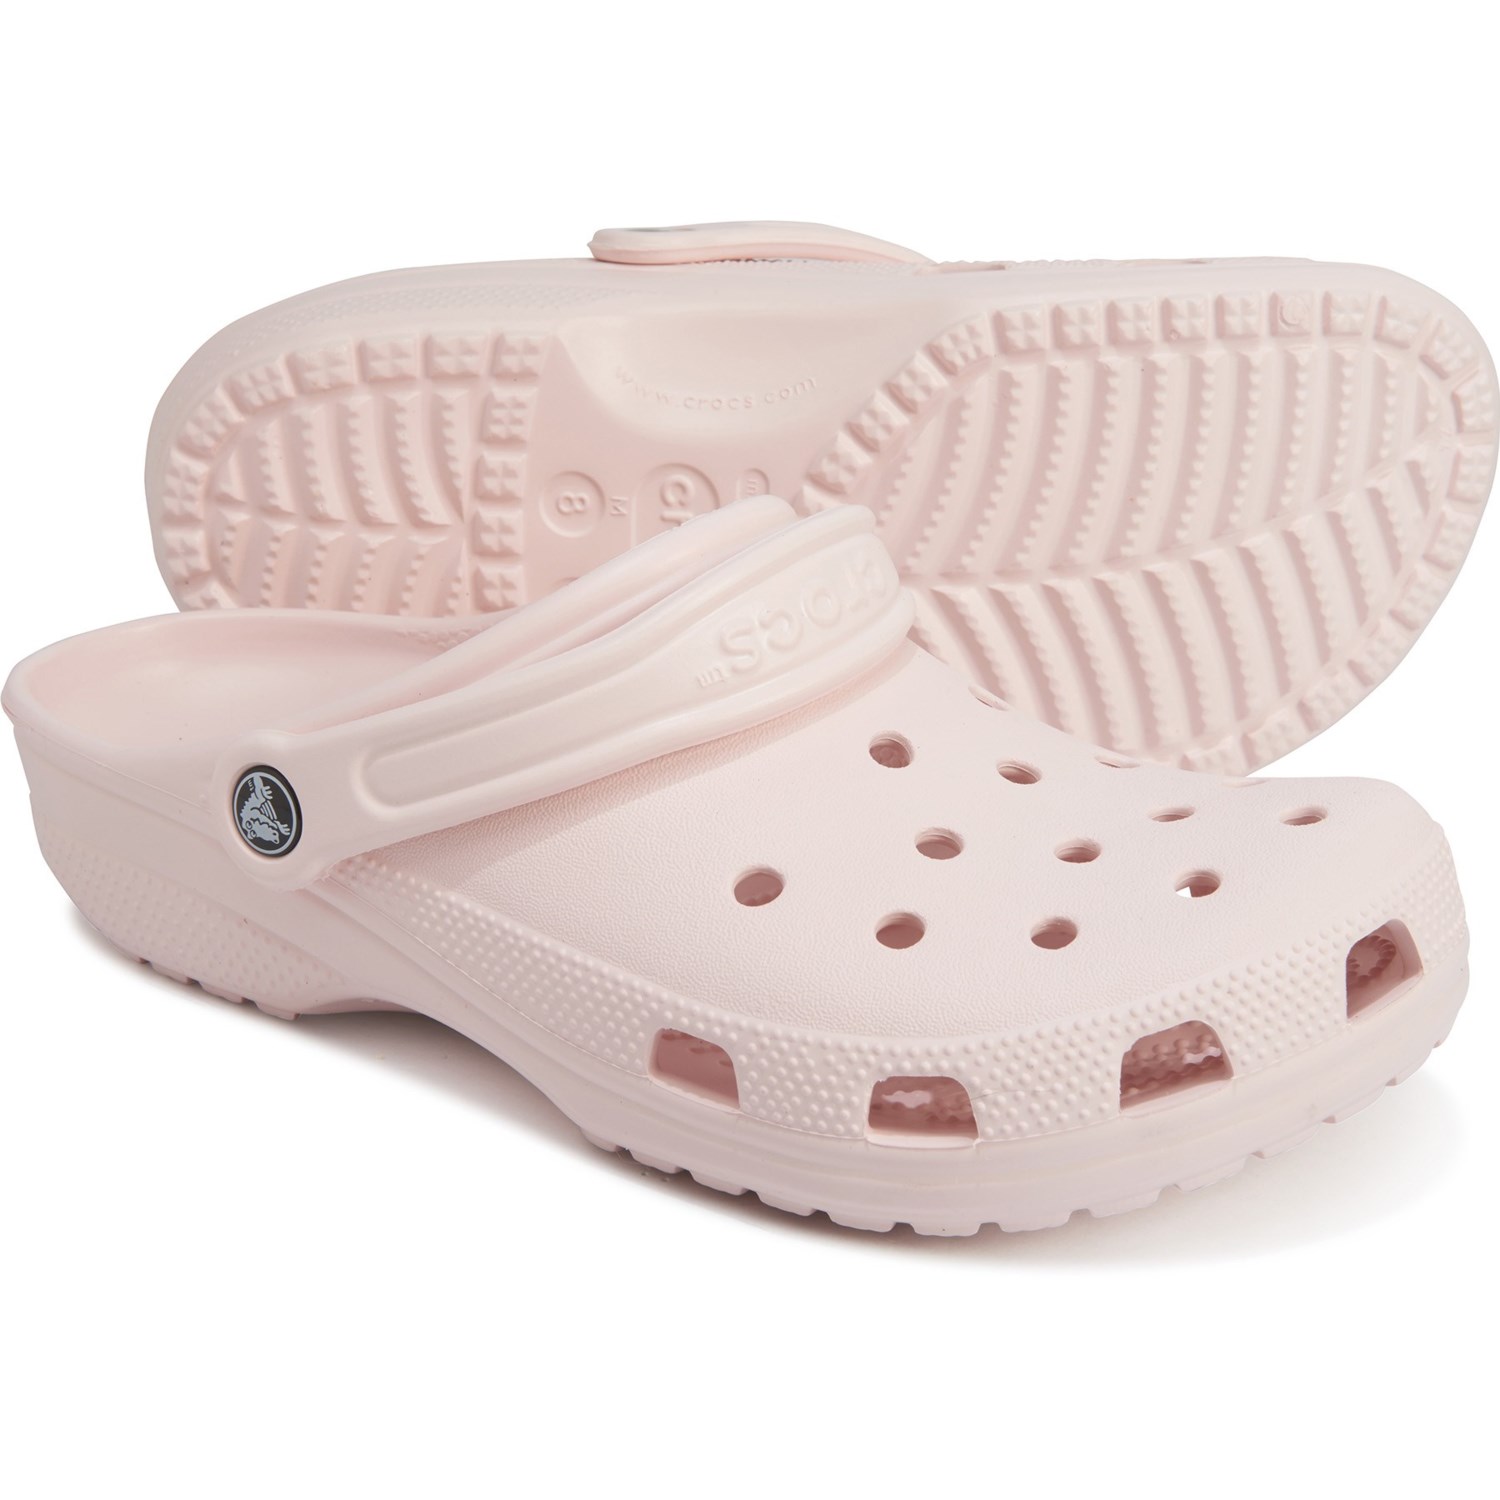 barely pink crocs Online shopping has 